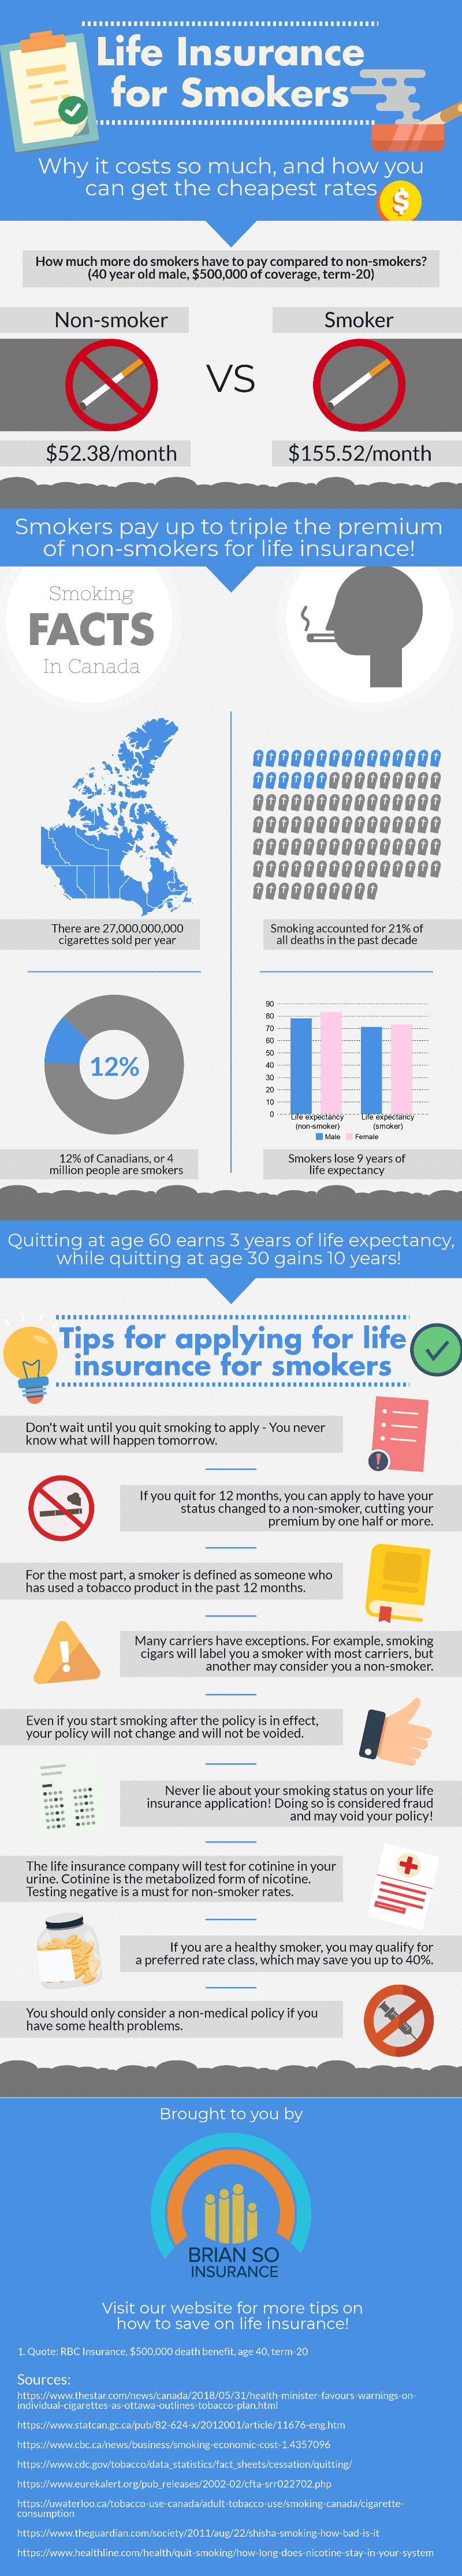 life insurance for smokers infographic